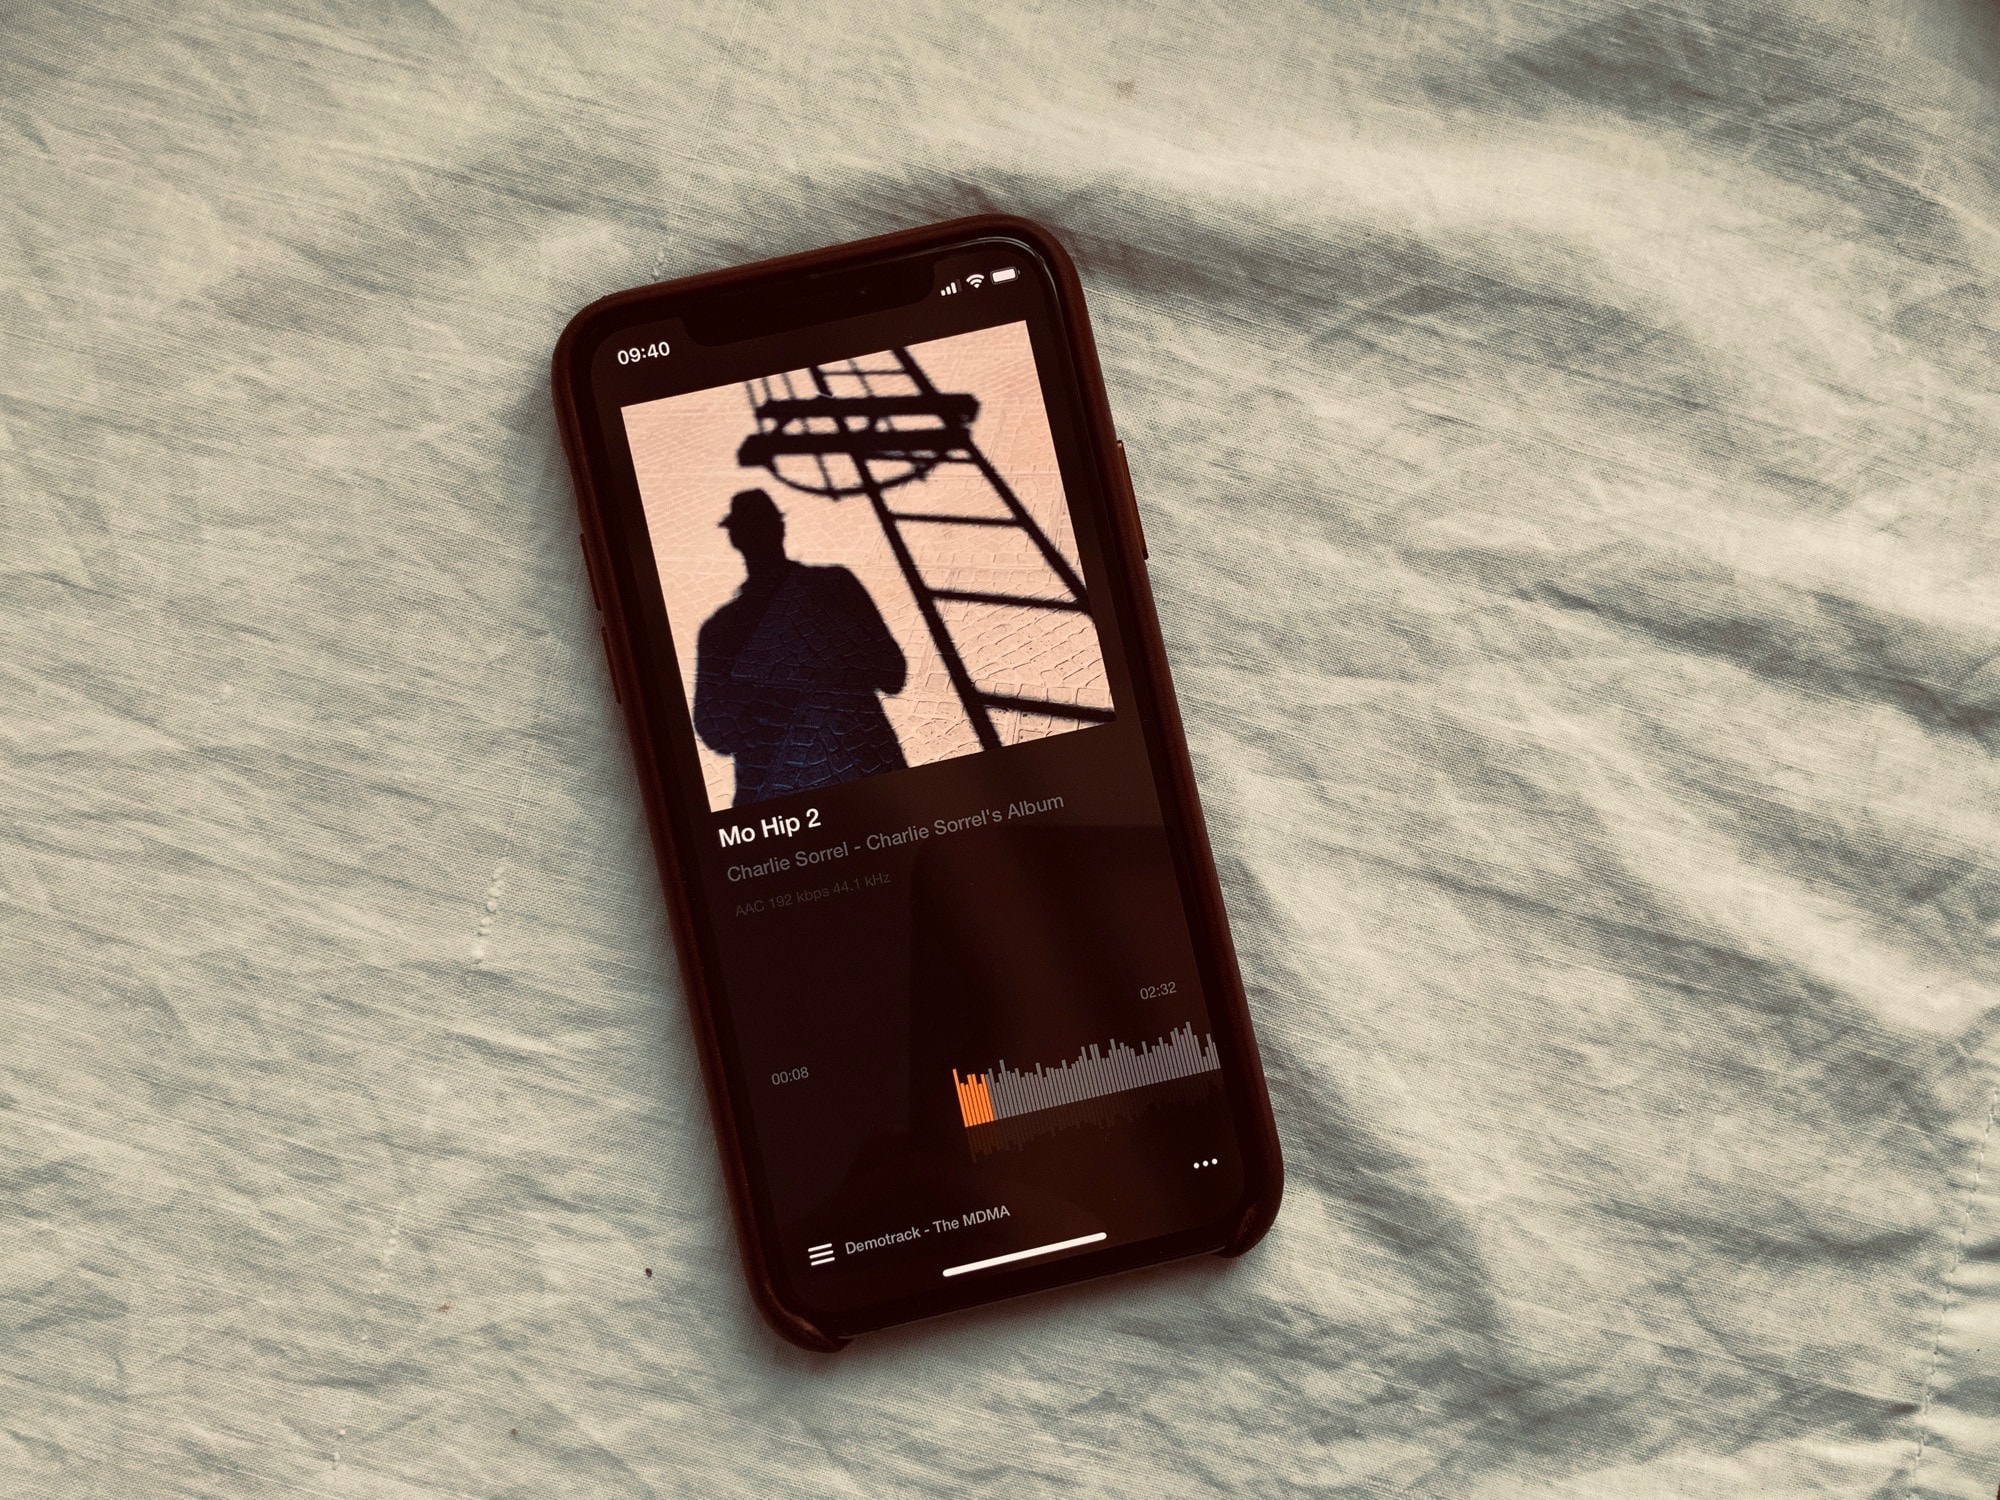 Add your own music to your iPhone without iTunes.